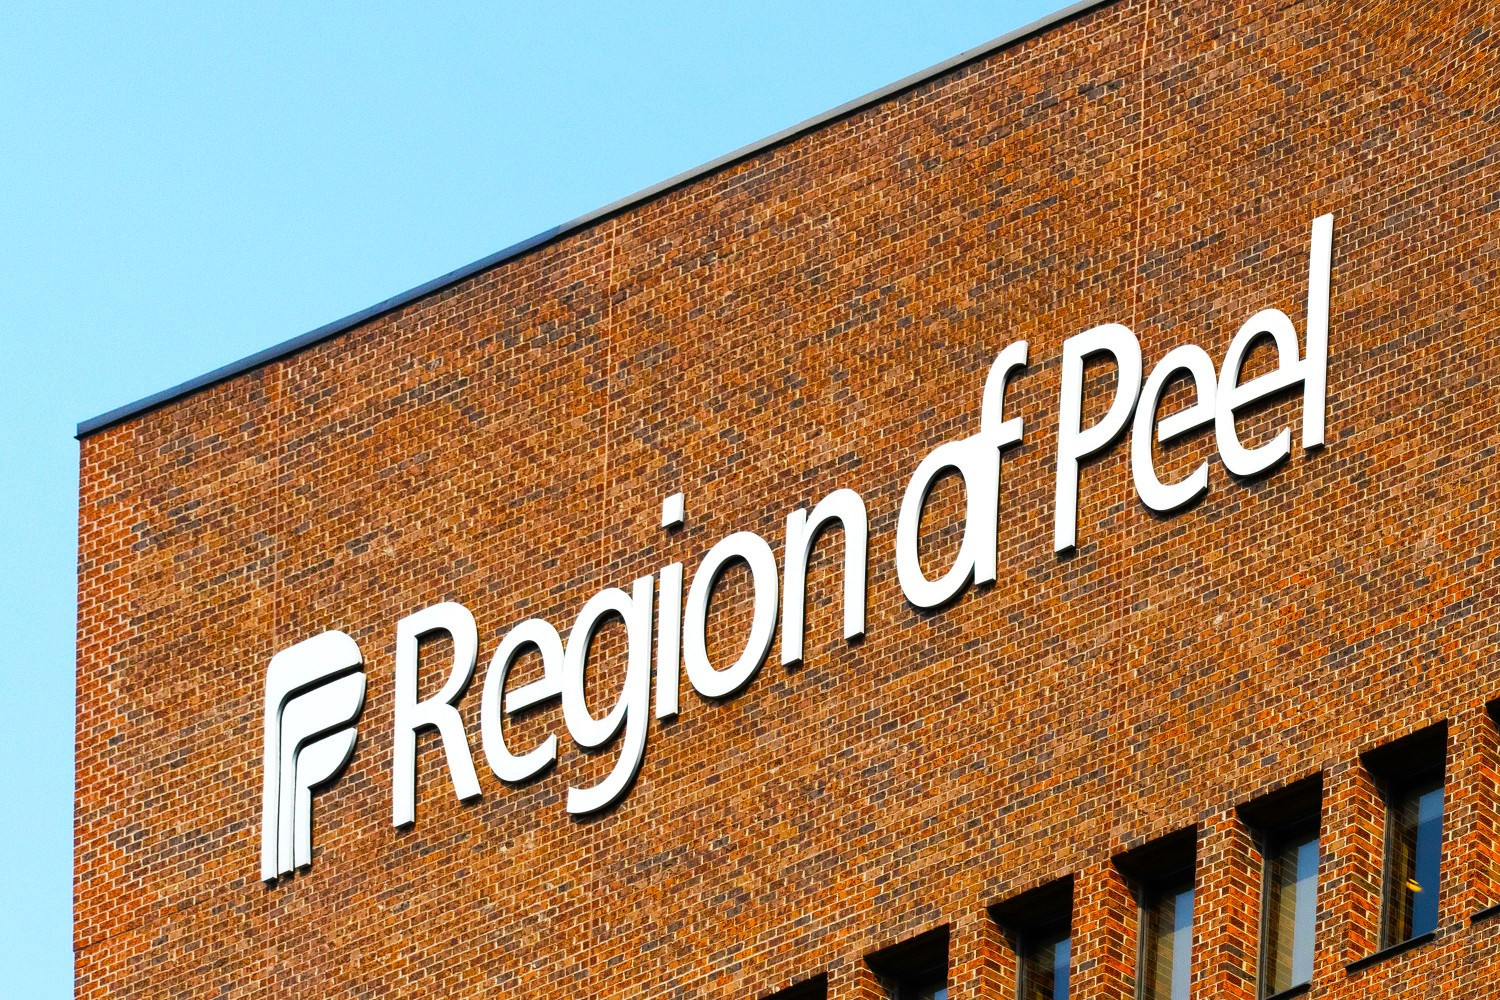 Union raising concerns about jobs, planned downloading of Peel services onto municipalities